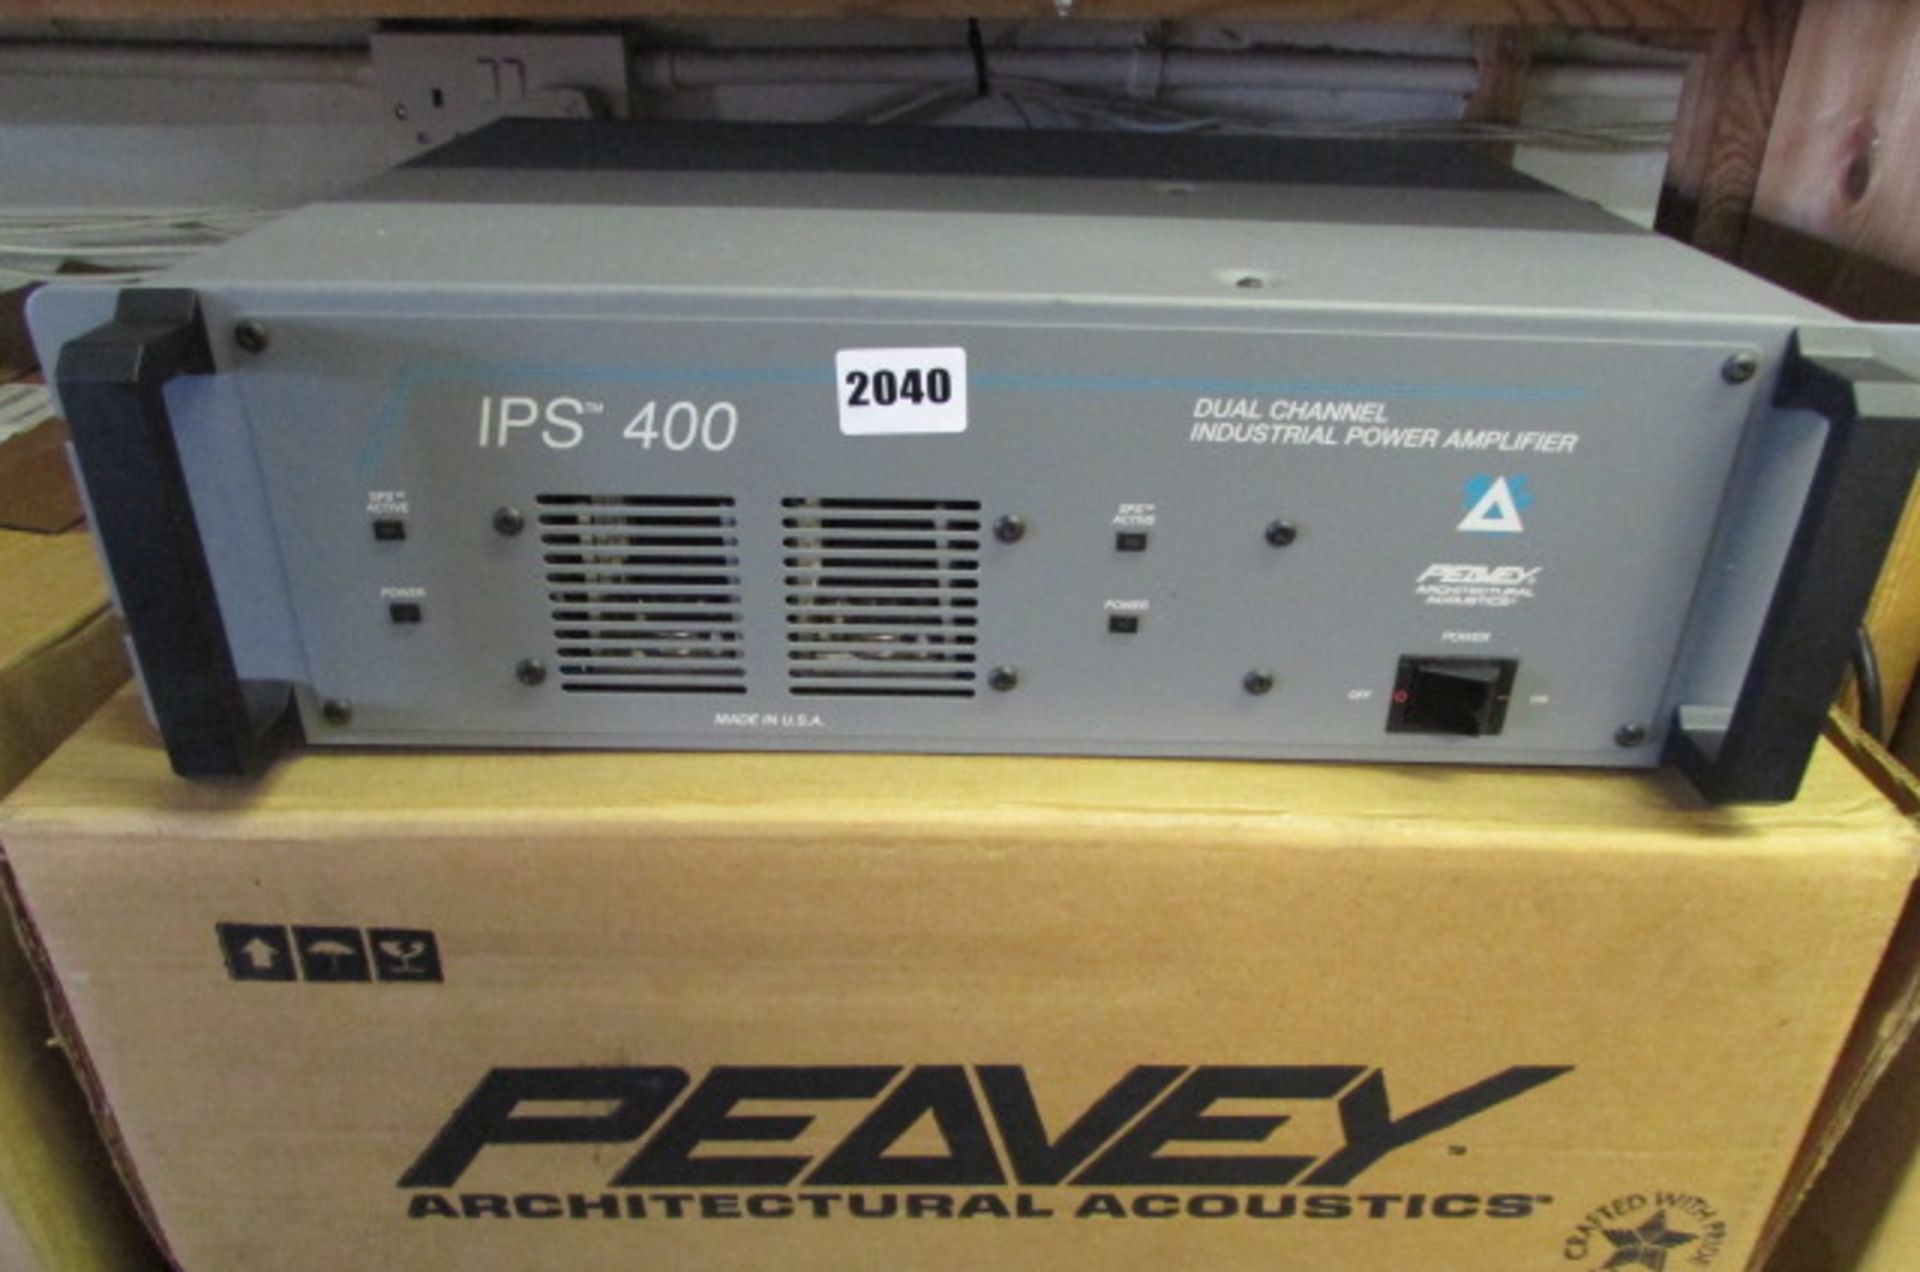 118  Peavey IPS400 dual channel industrial power amplifier with box